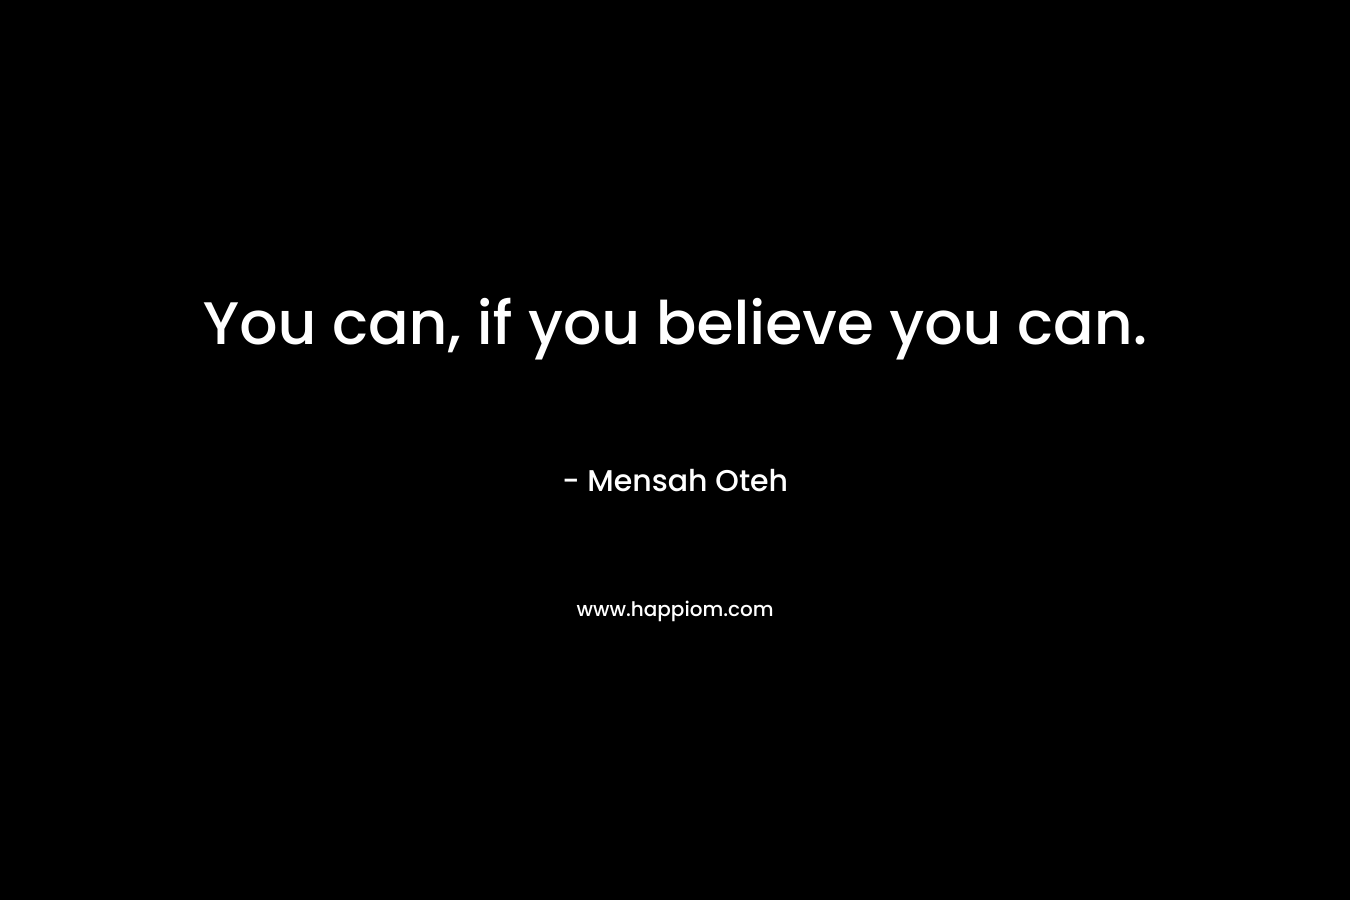 You can, if you believe you can. – Mensah Oteh